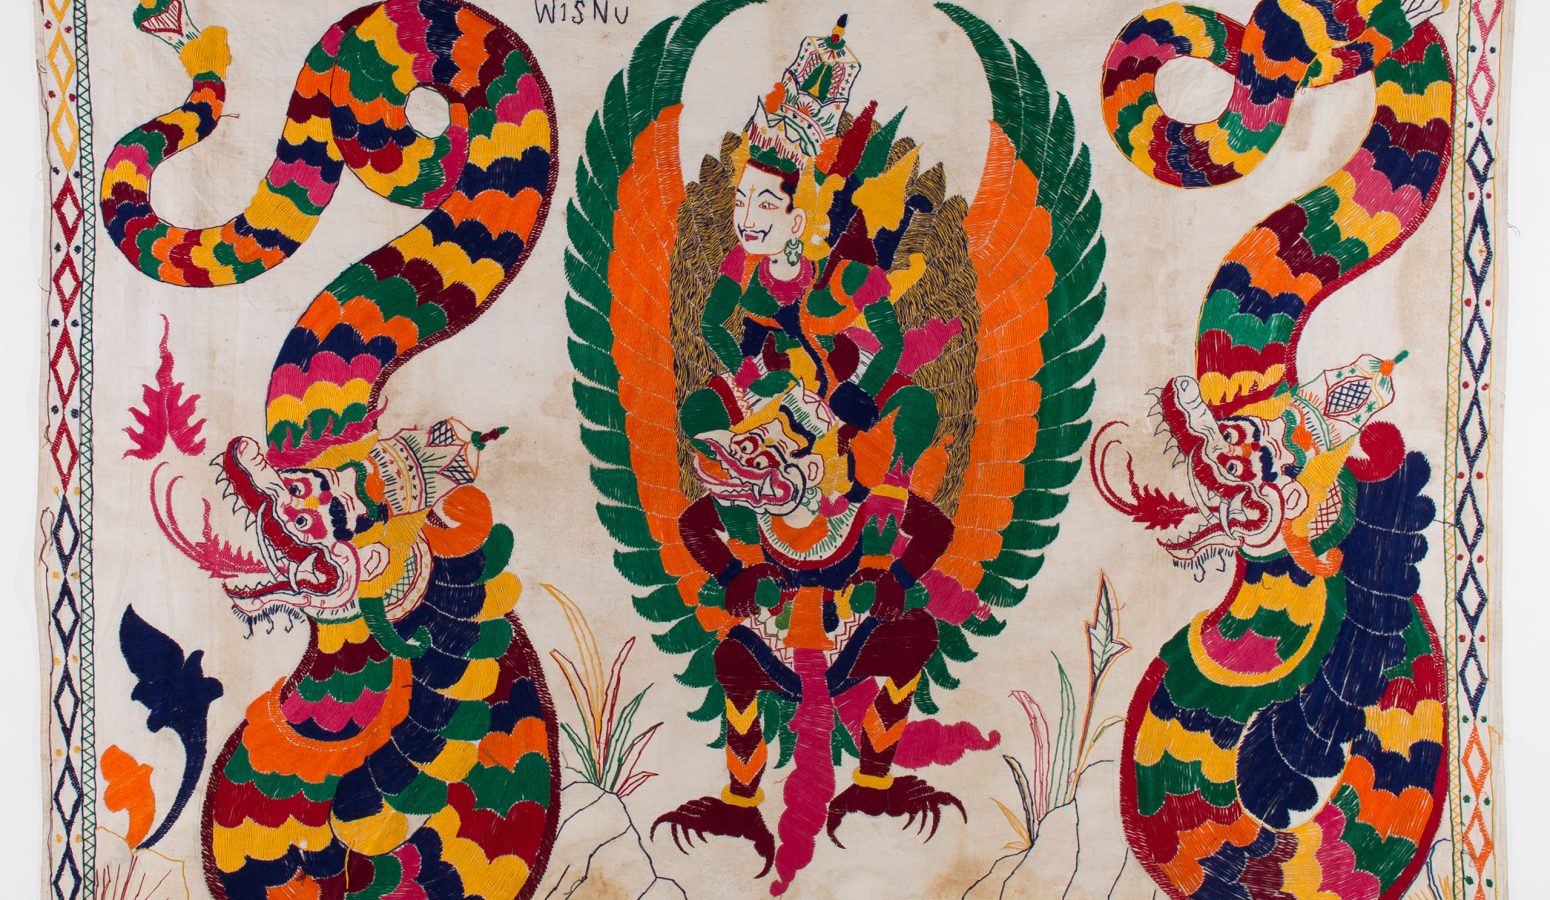 A colorful embroidered tapestry with humans, dragons, and winged creatures